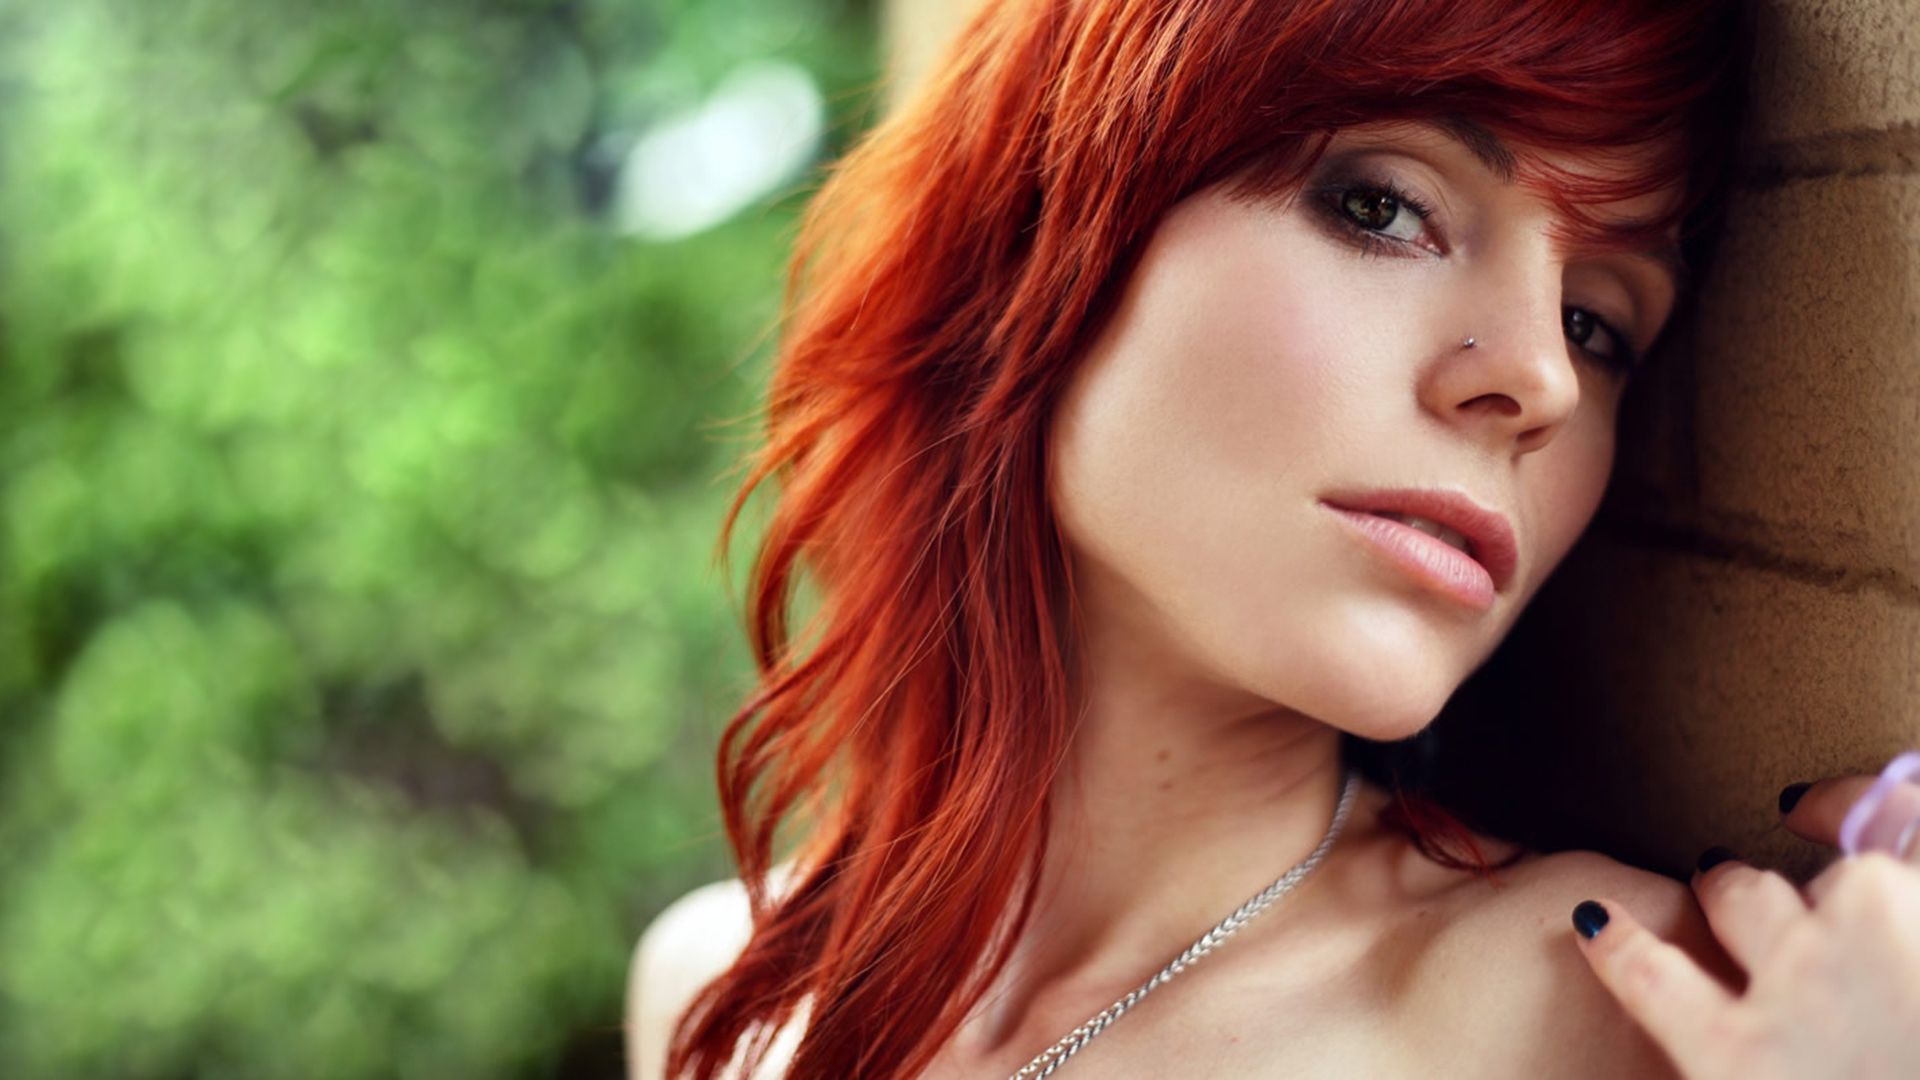 Free download redhead girl 1920x1080 wallpaper Archives